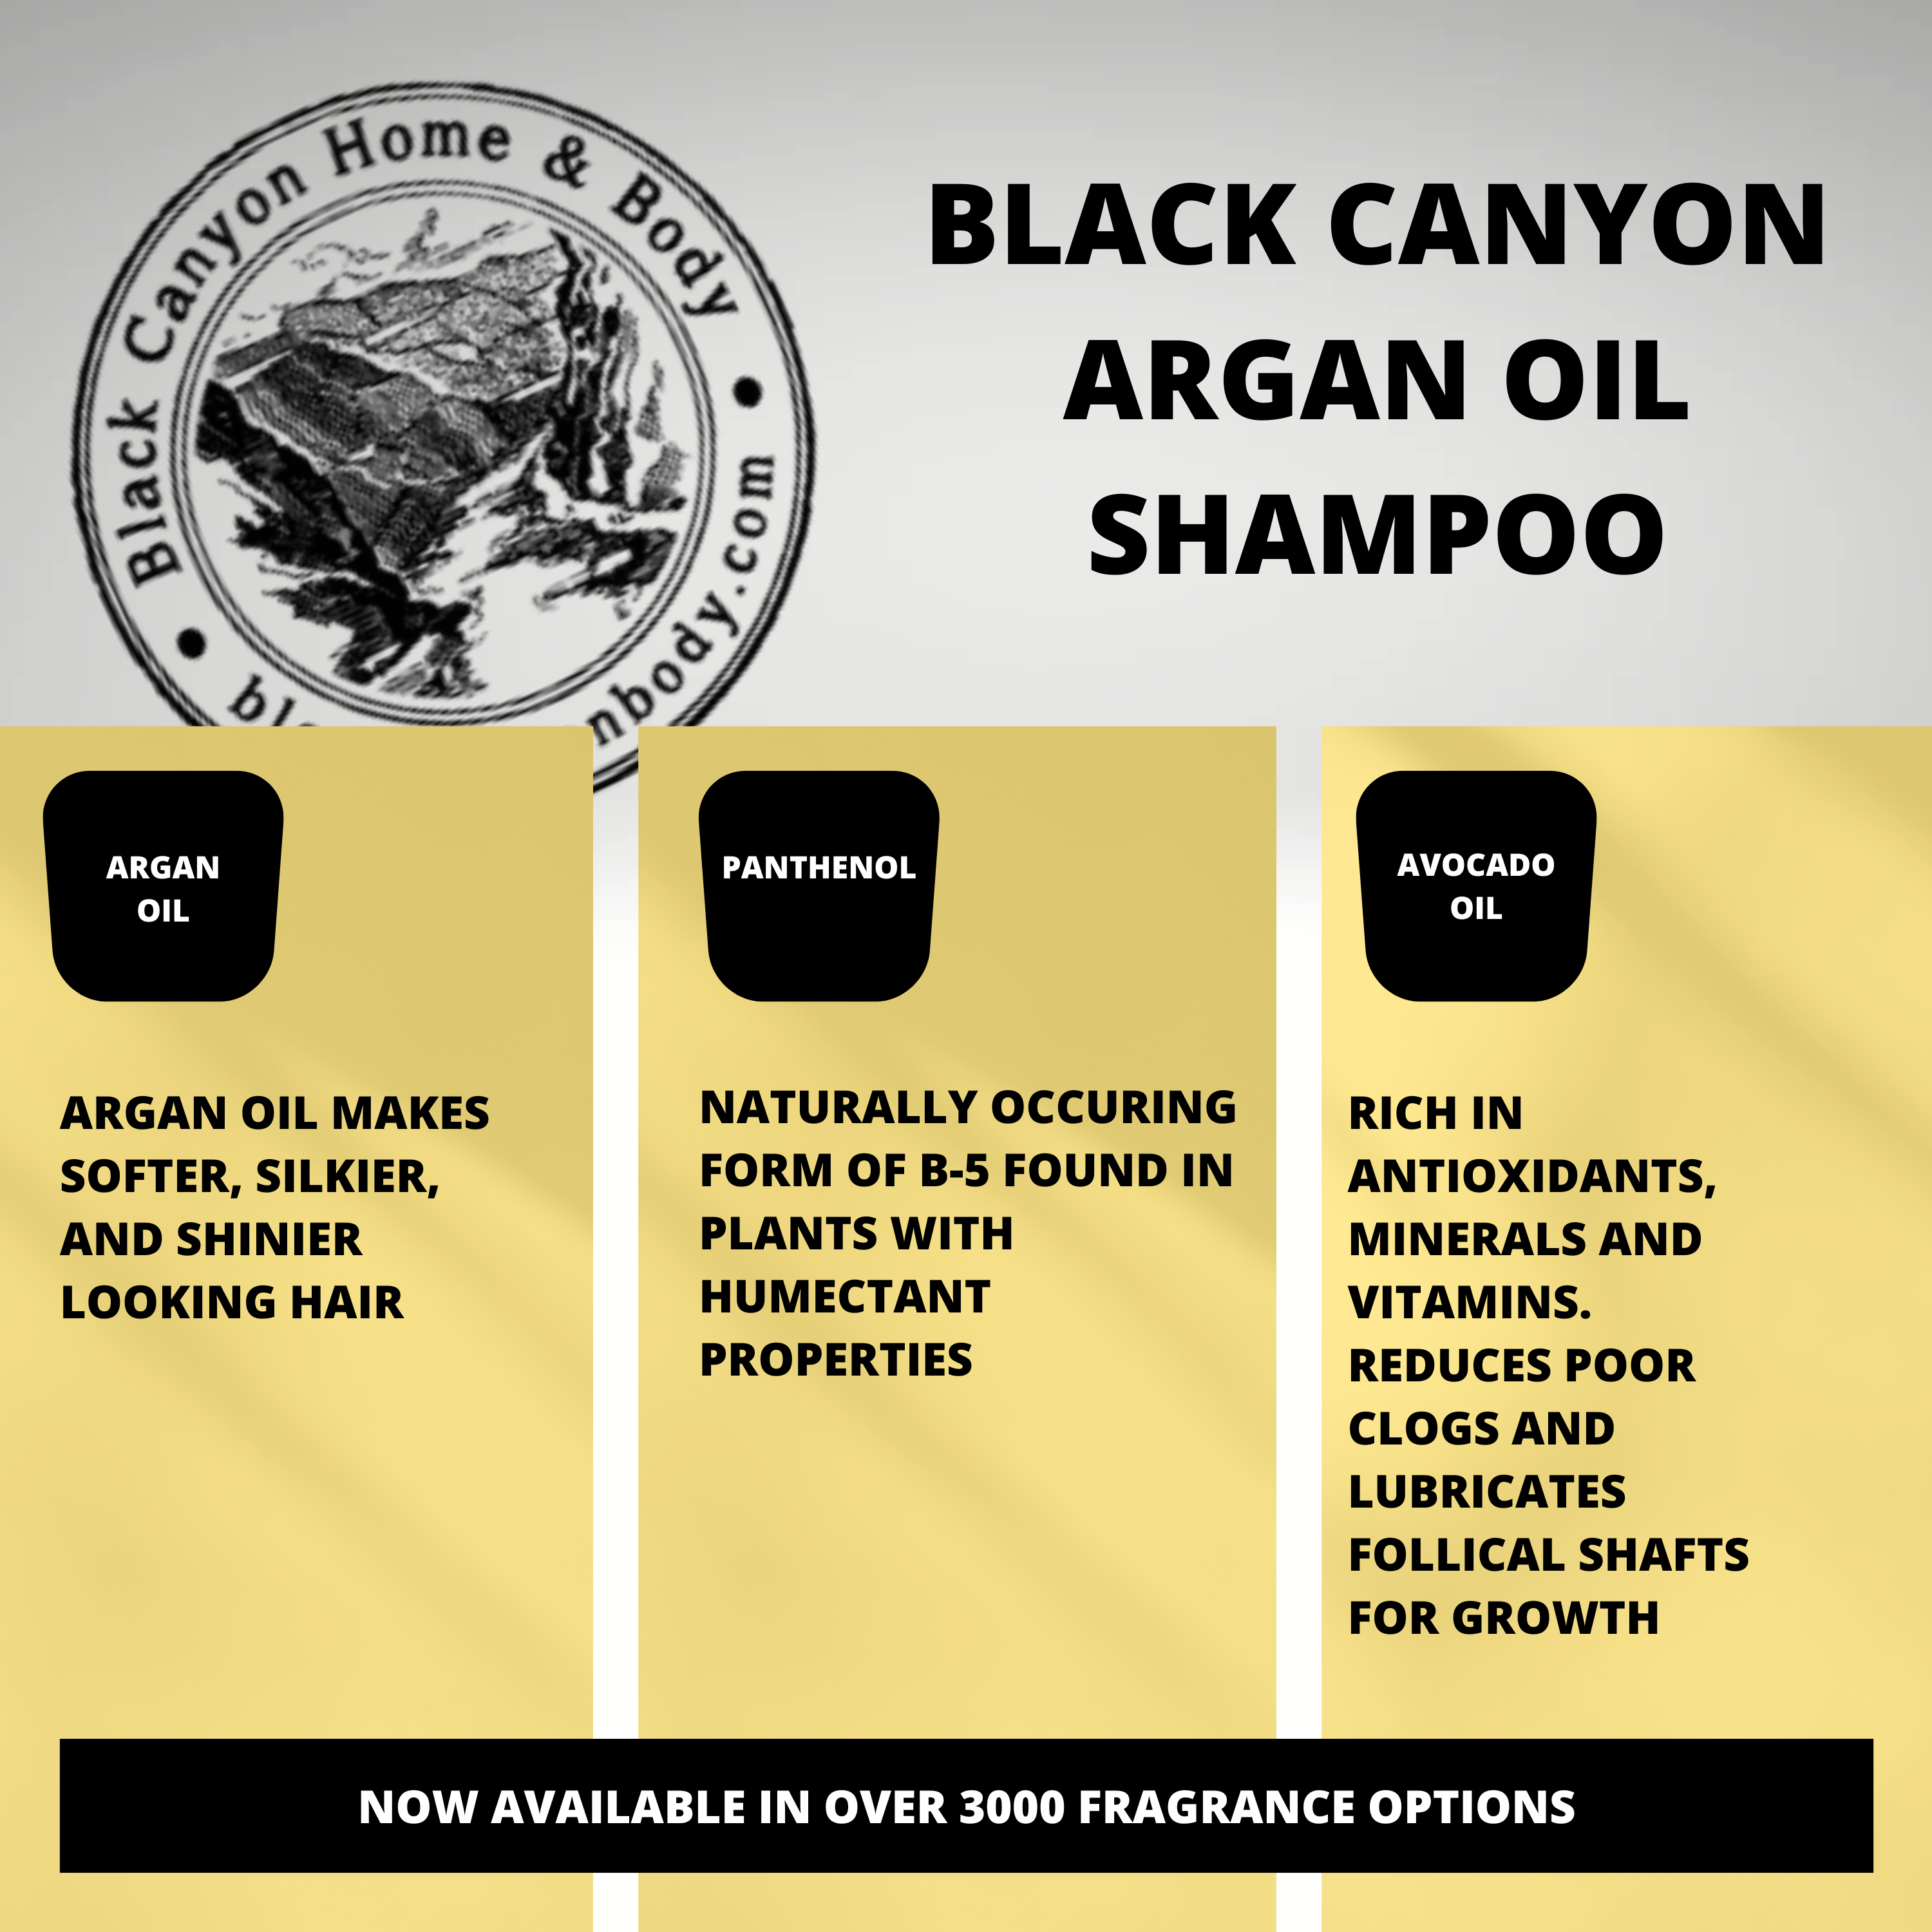 Black Canyon Hyssop Scented Shampoo with Argan Oil